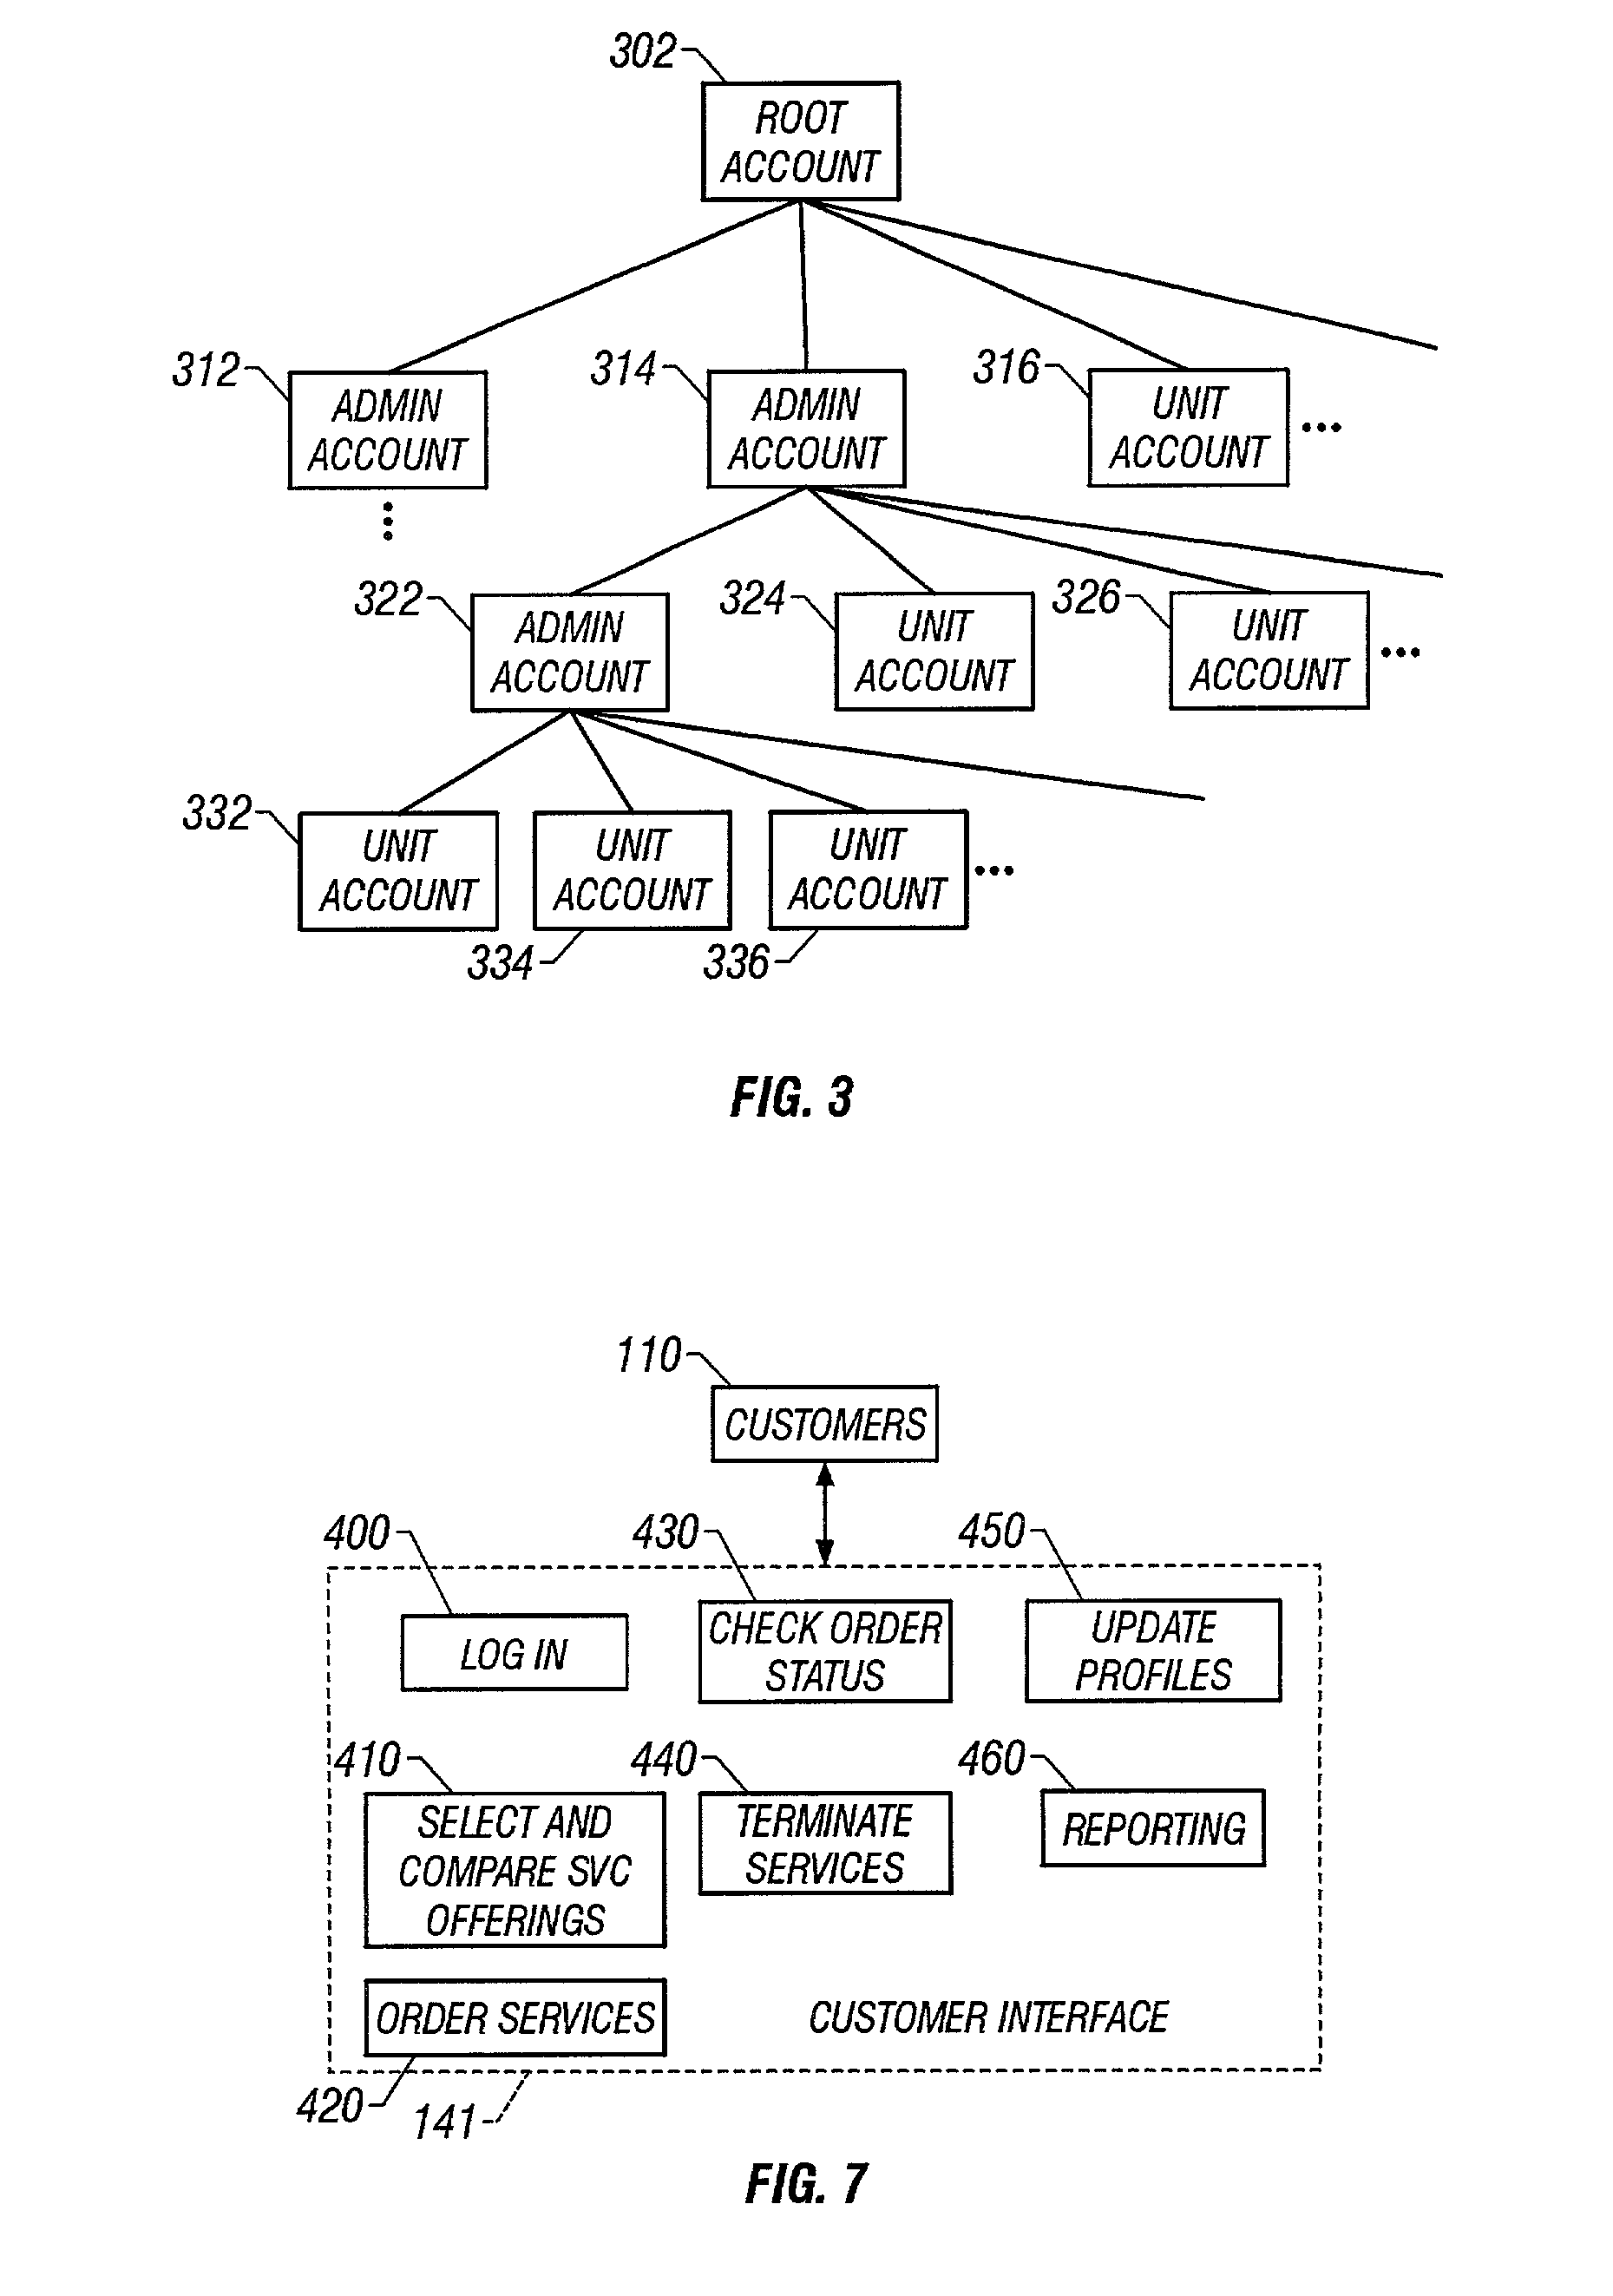 Method and apparatus for facilitating electronic acquisition and maintenance of goods and services via the internet